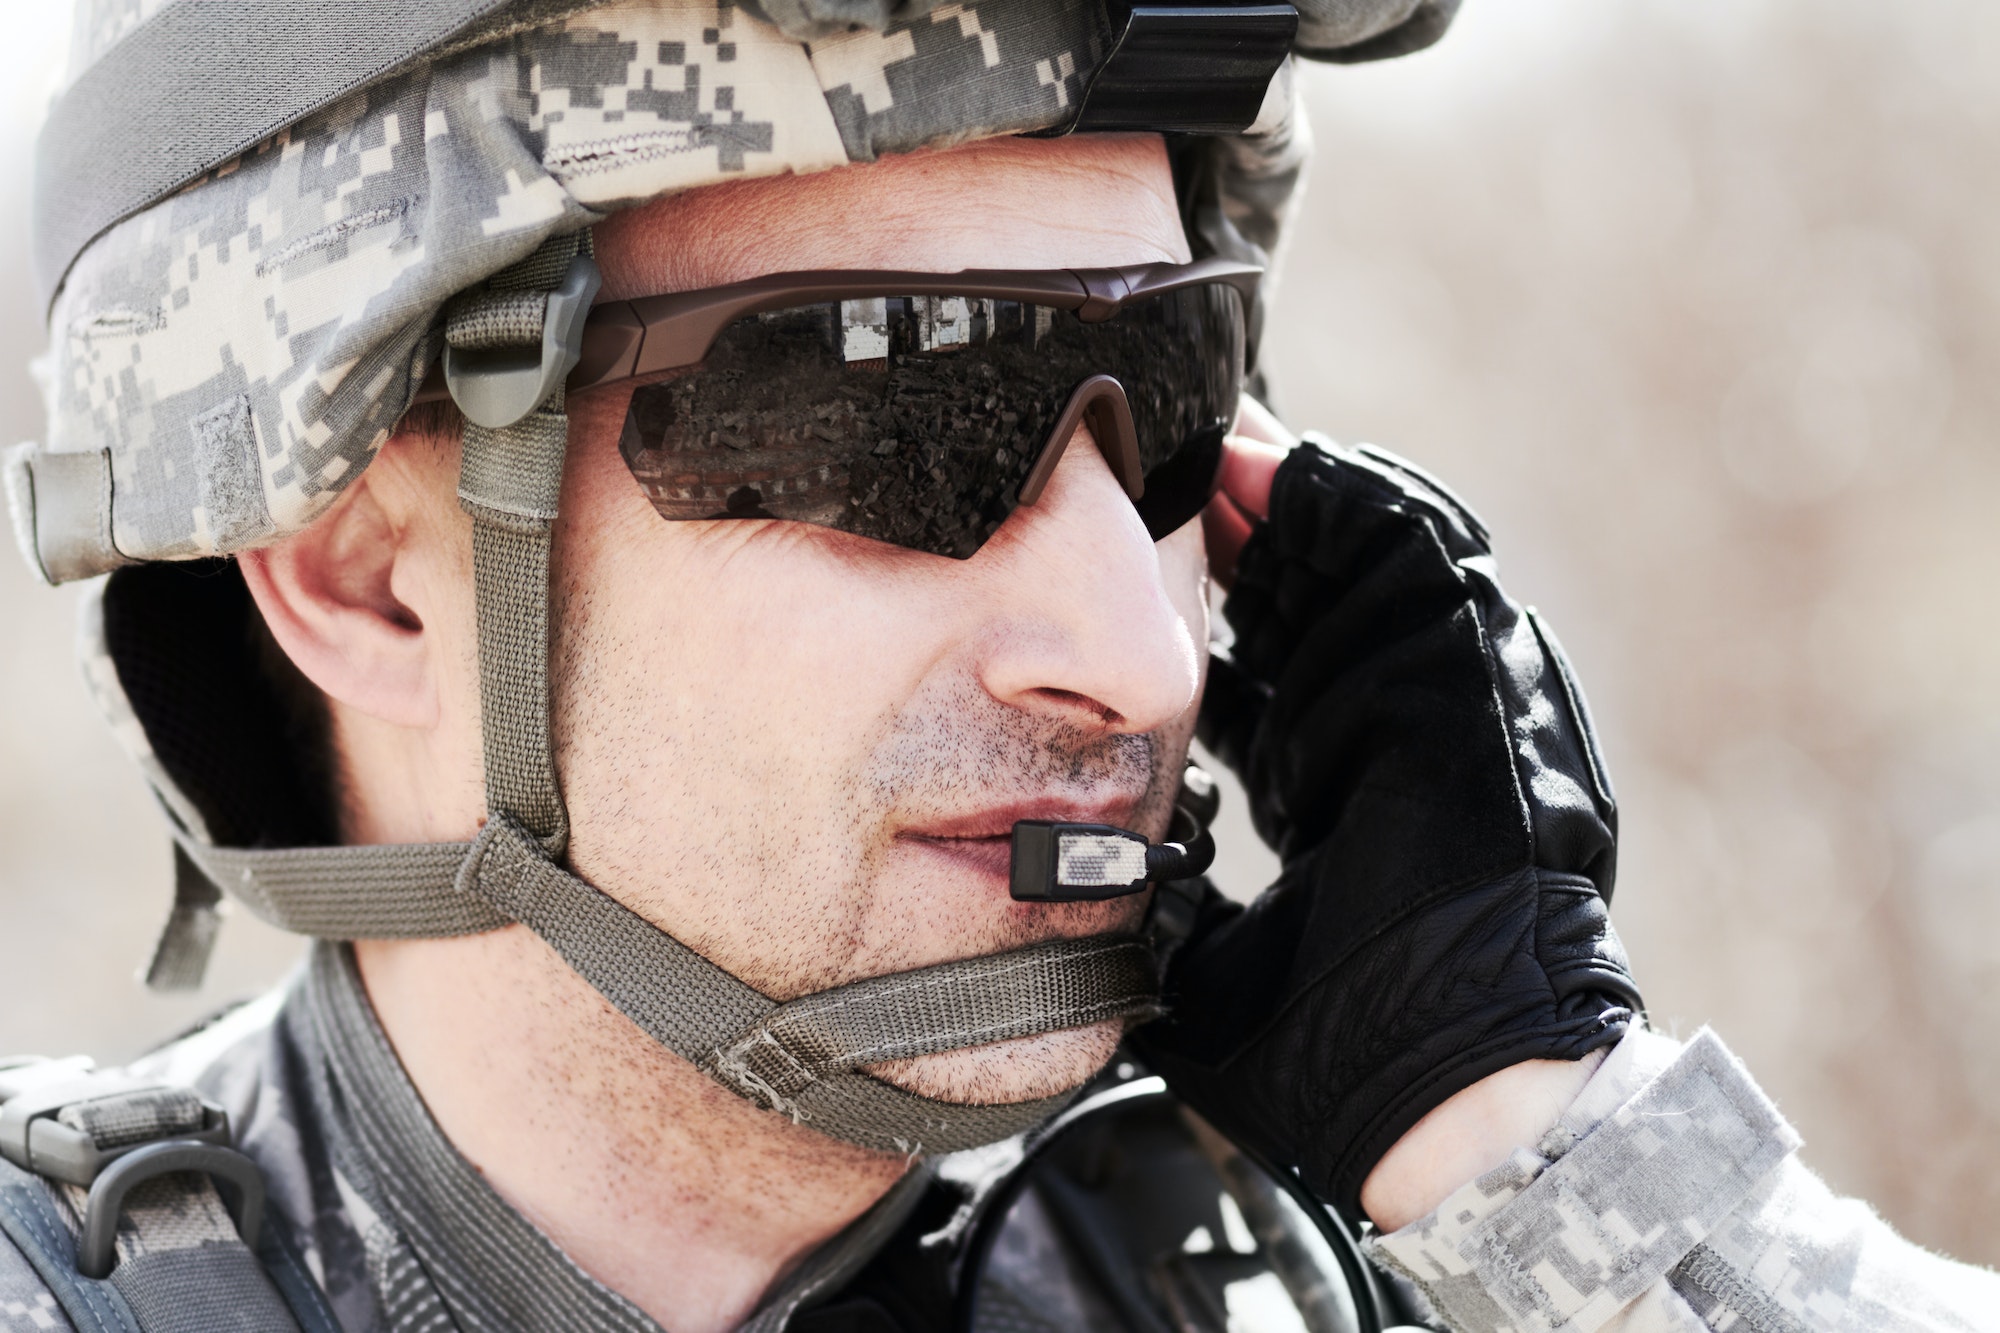 Keeping communication on command. Closeup profile of a soldier communicating on his headset.